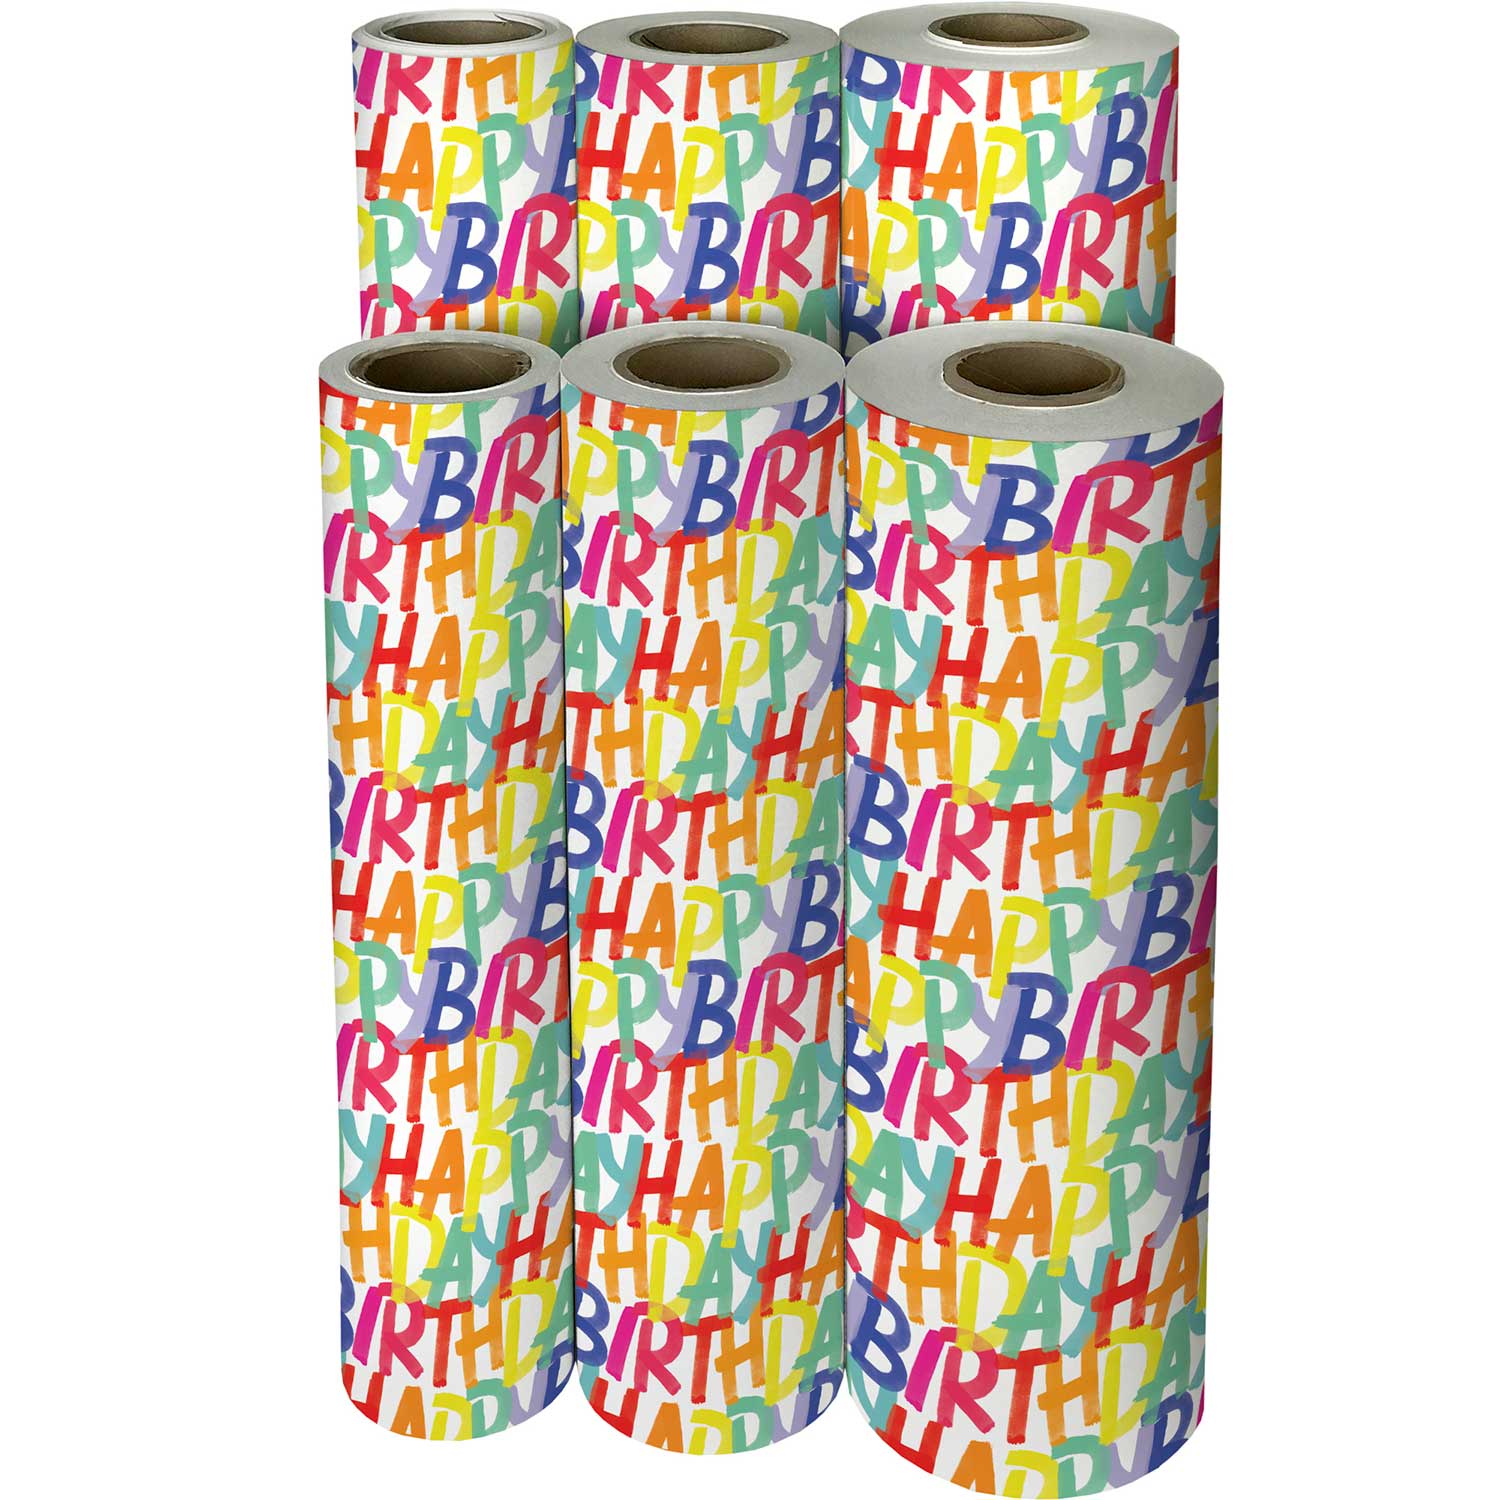 Paquet de 12 crayons Rainbow Paper Wrapped Hb Hardness Gift pour